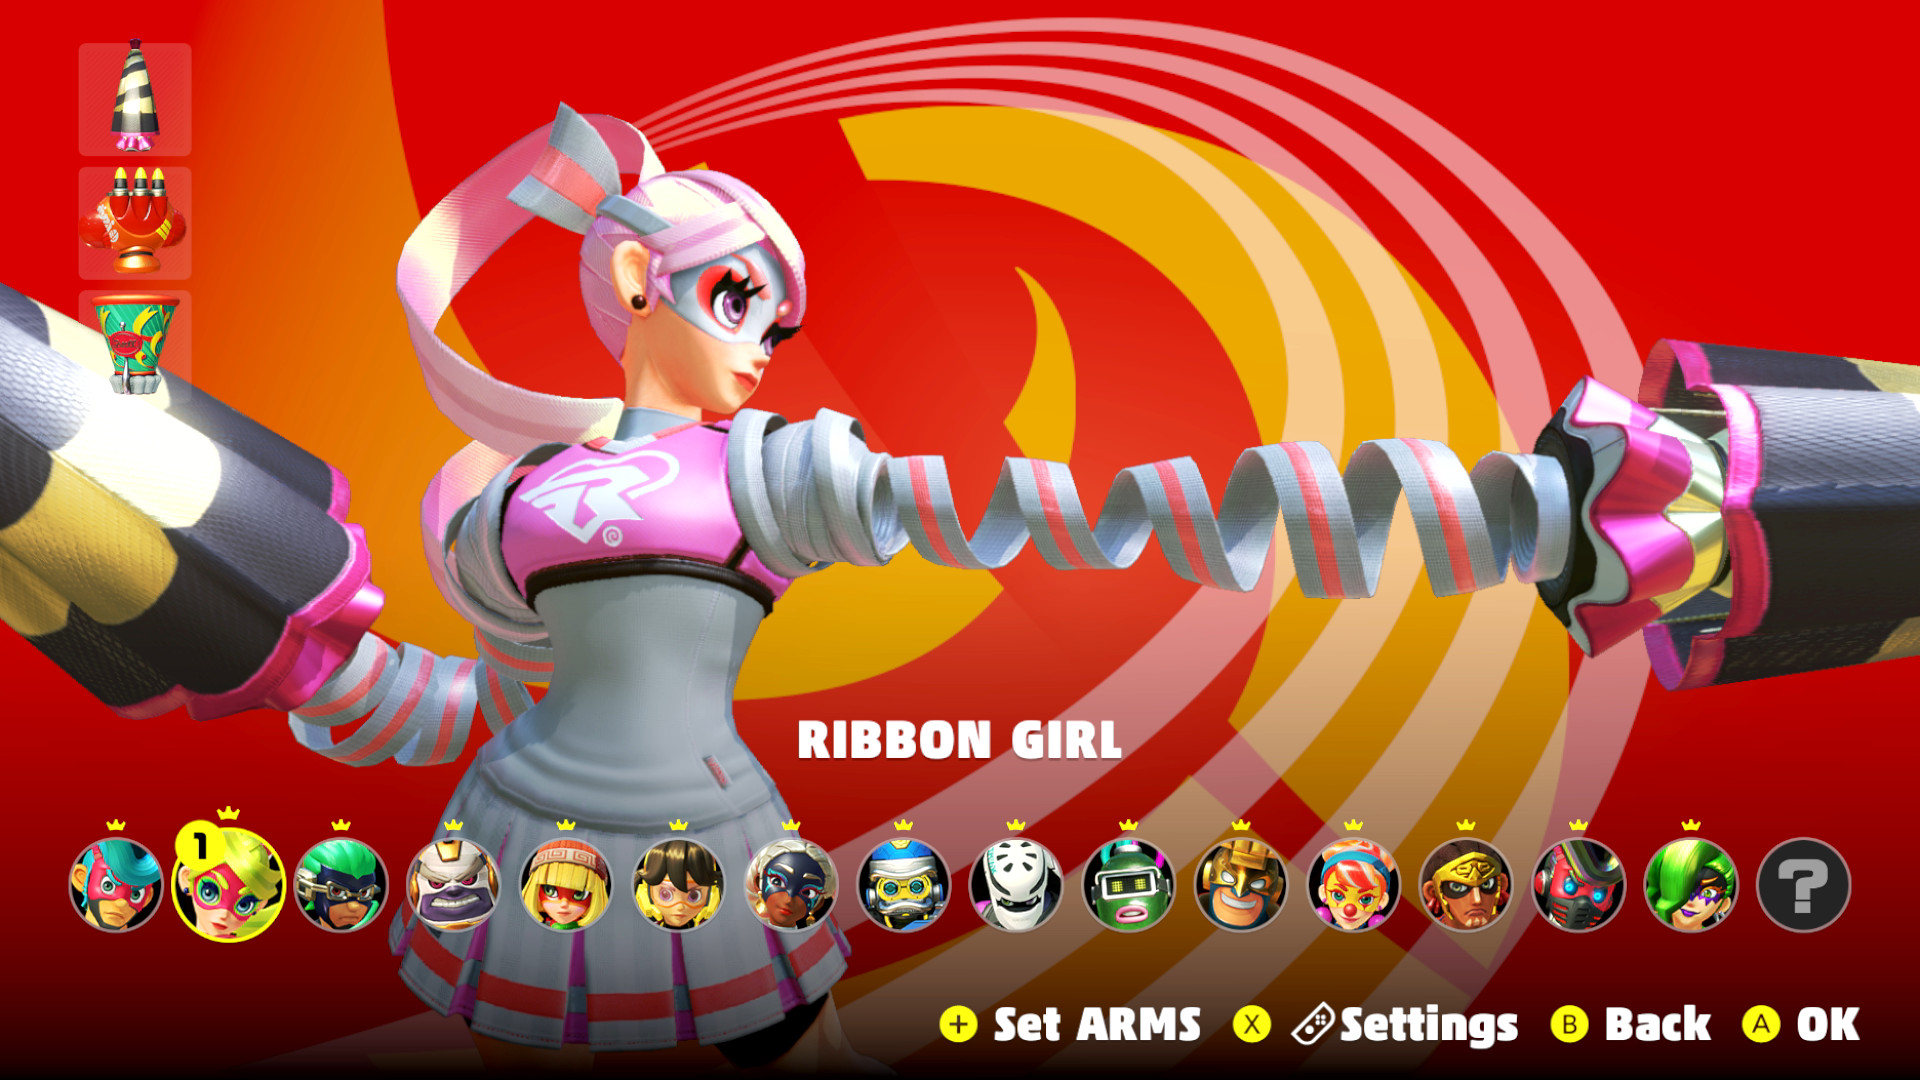 Best of Ribbon girl arms